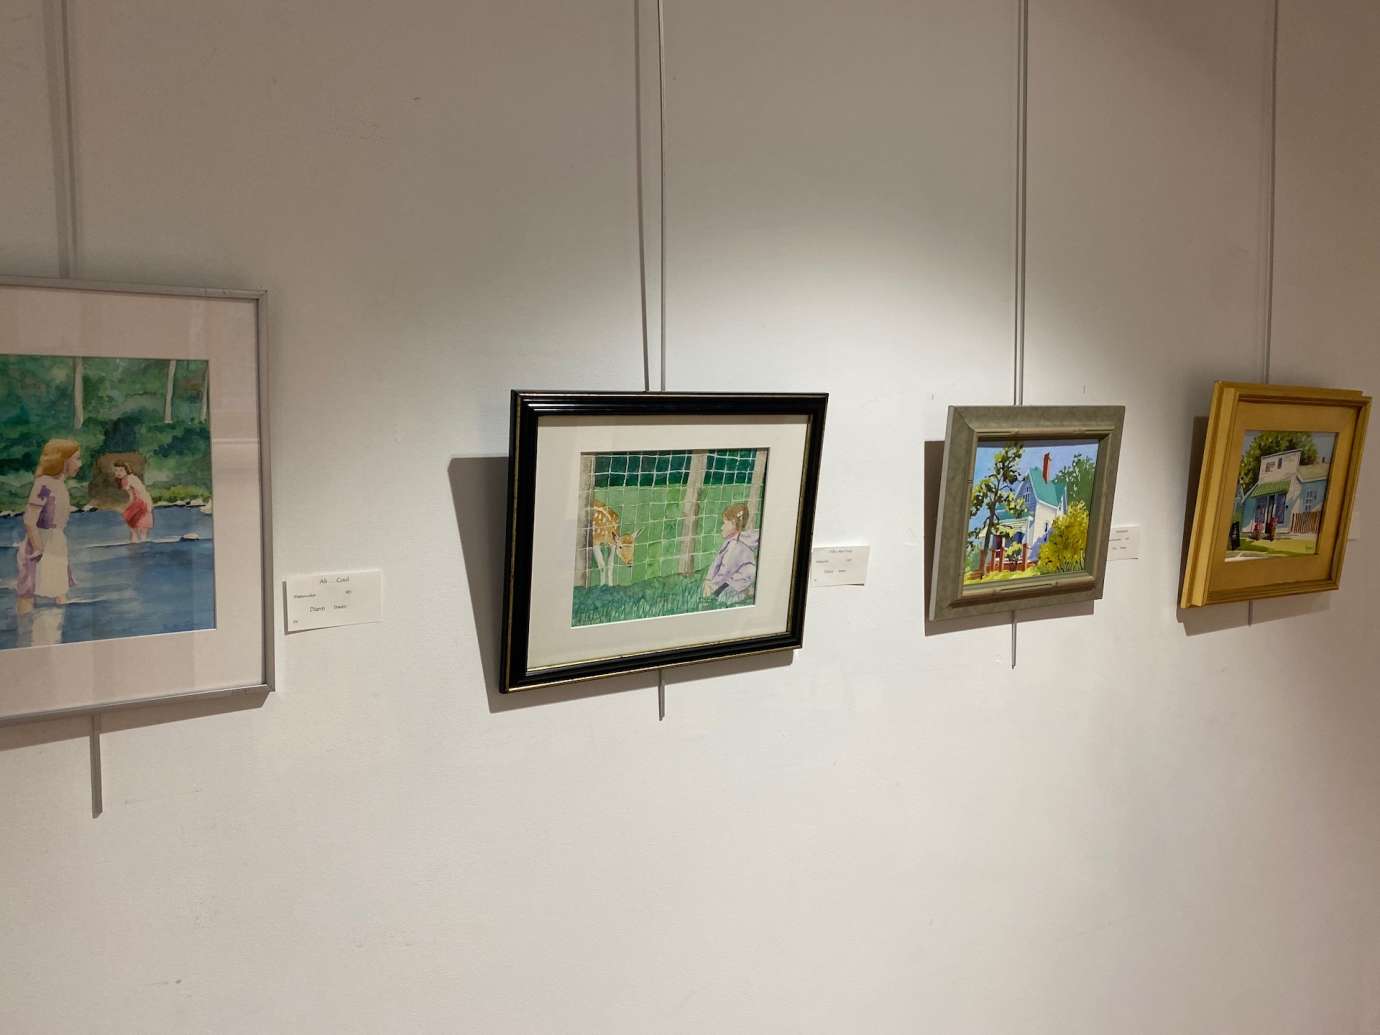 Sertoma Park Artist Association Exhibition - paintings hanging on wall